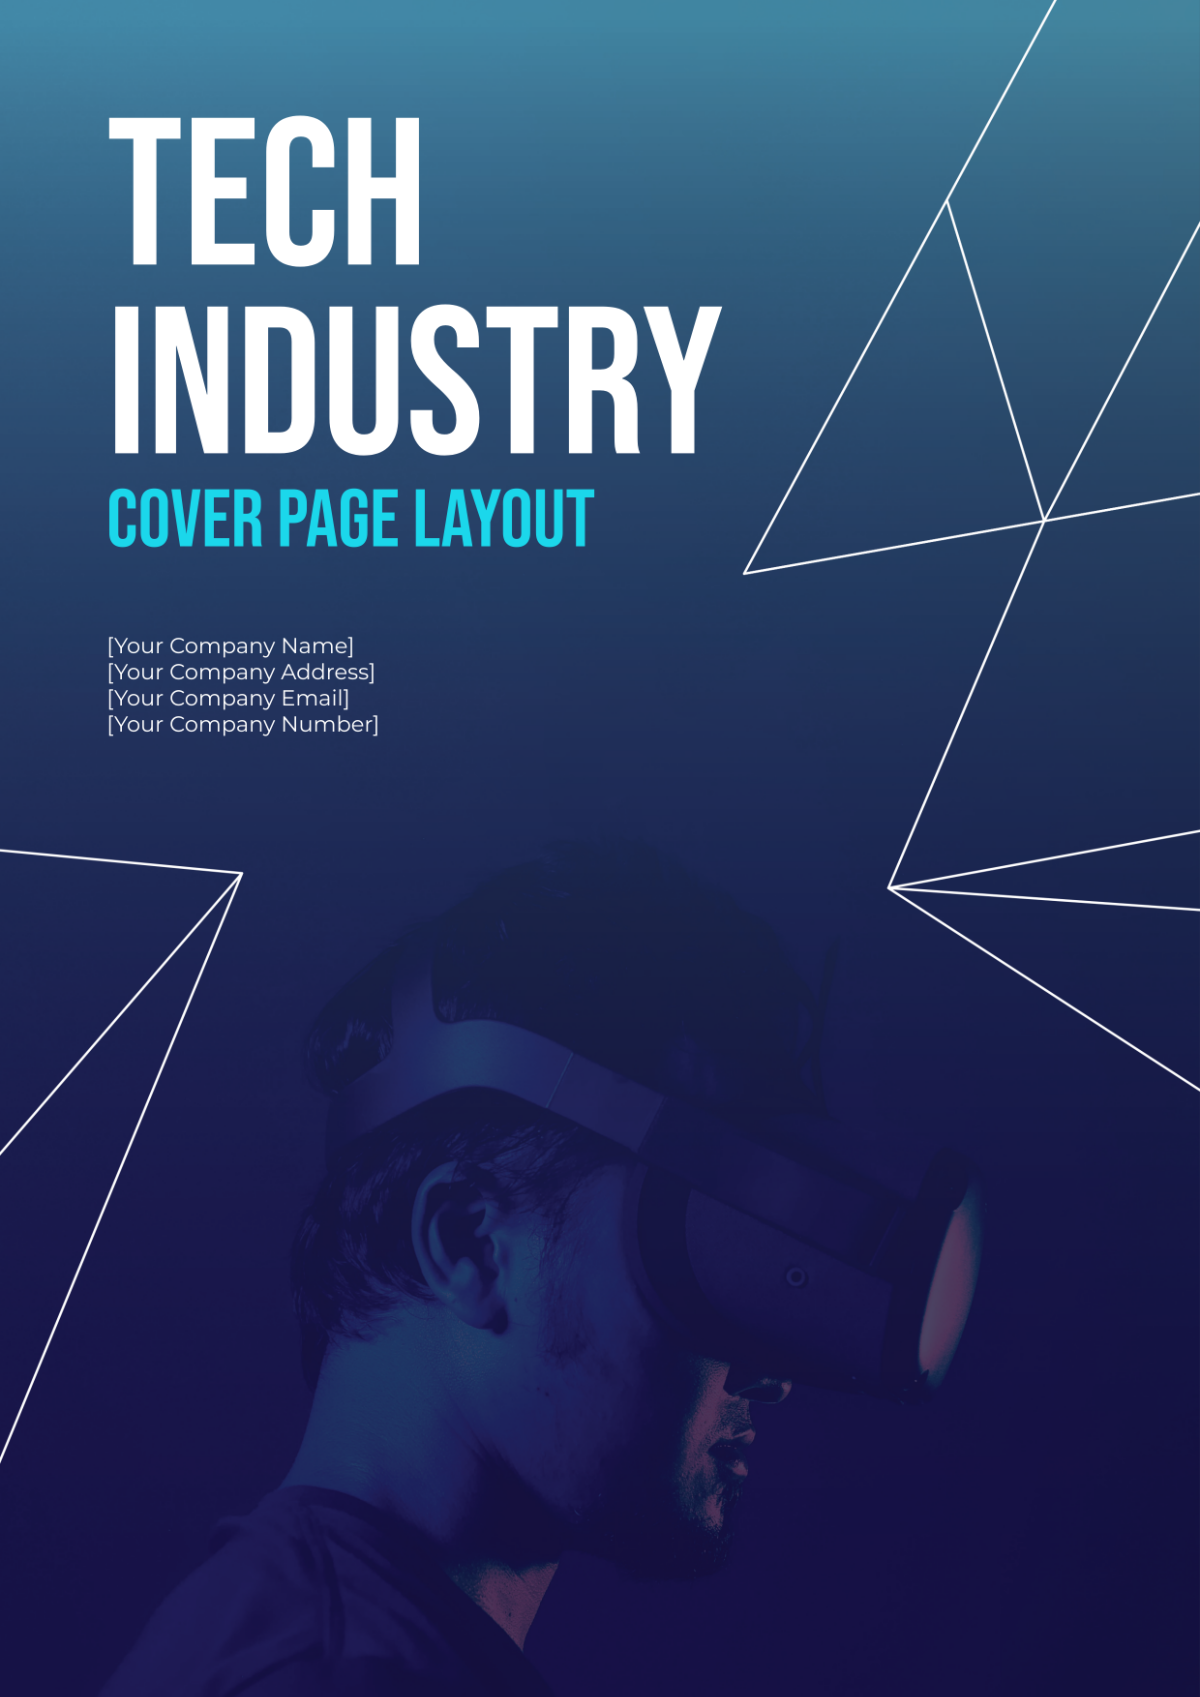 Tech Industry Cover Page Layout